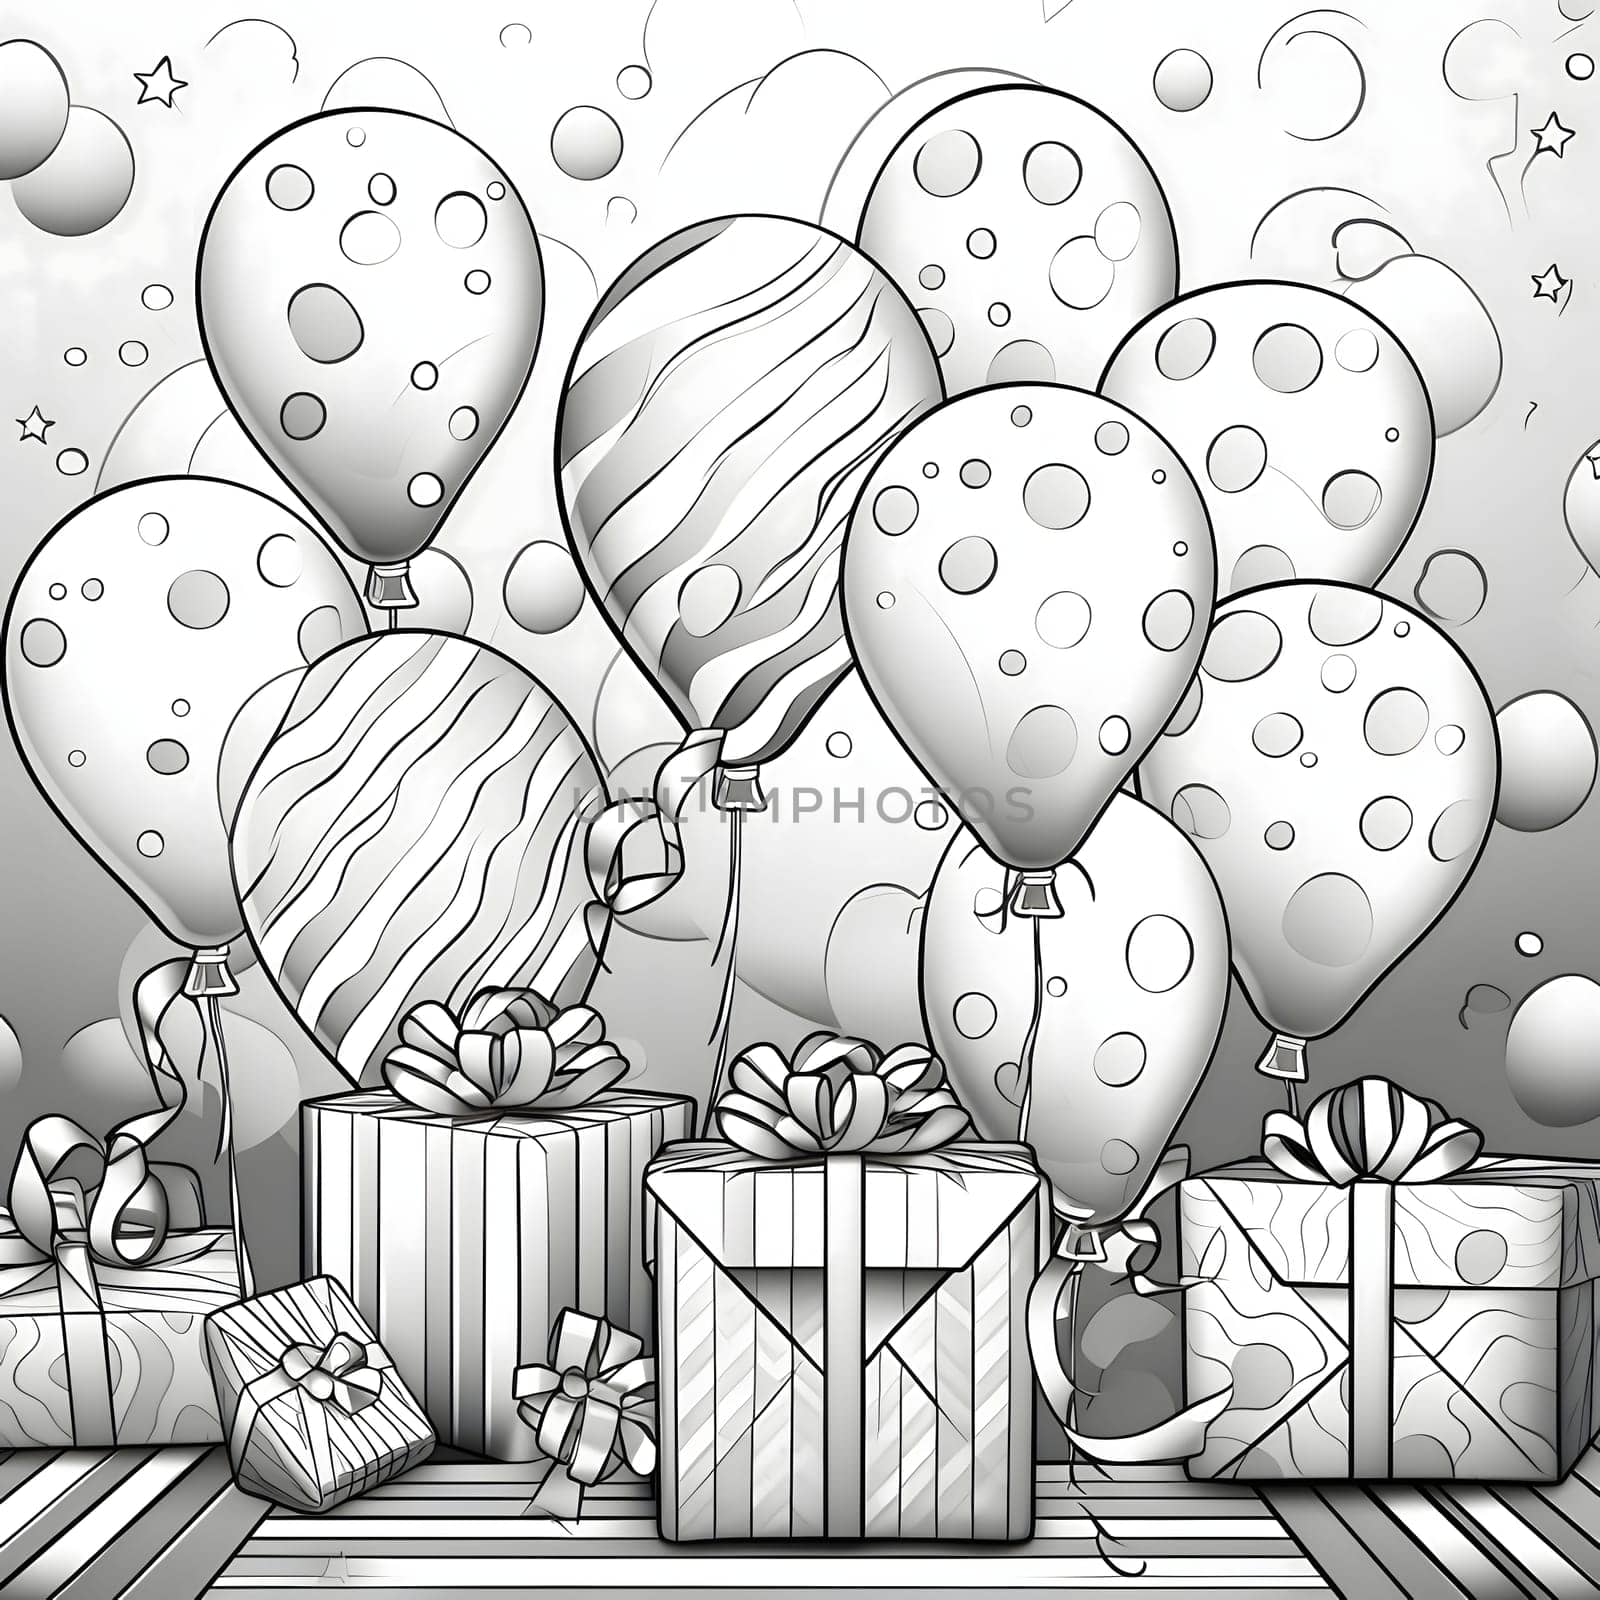 Balloons, gifts and confetti. Black and White coloring page. New Year's fun and festivities. A time of celebration and resolutions.